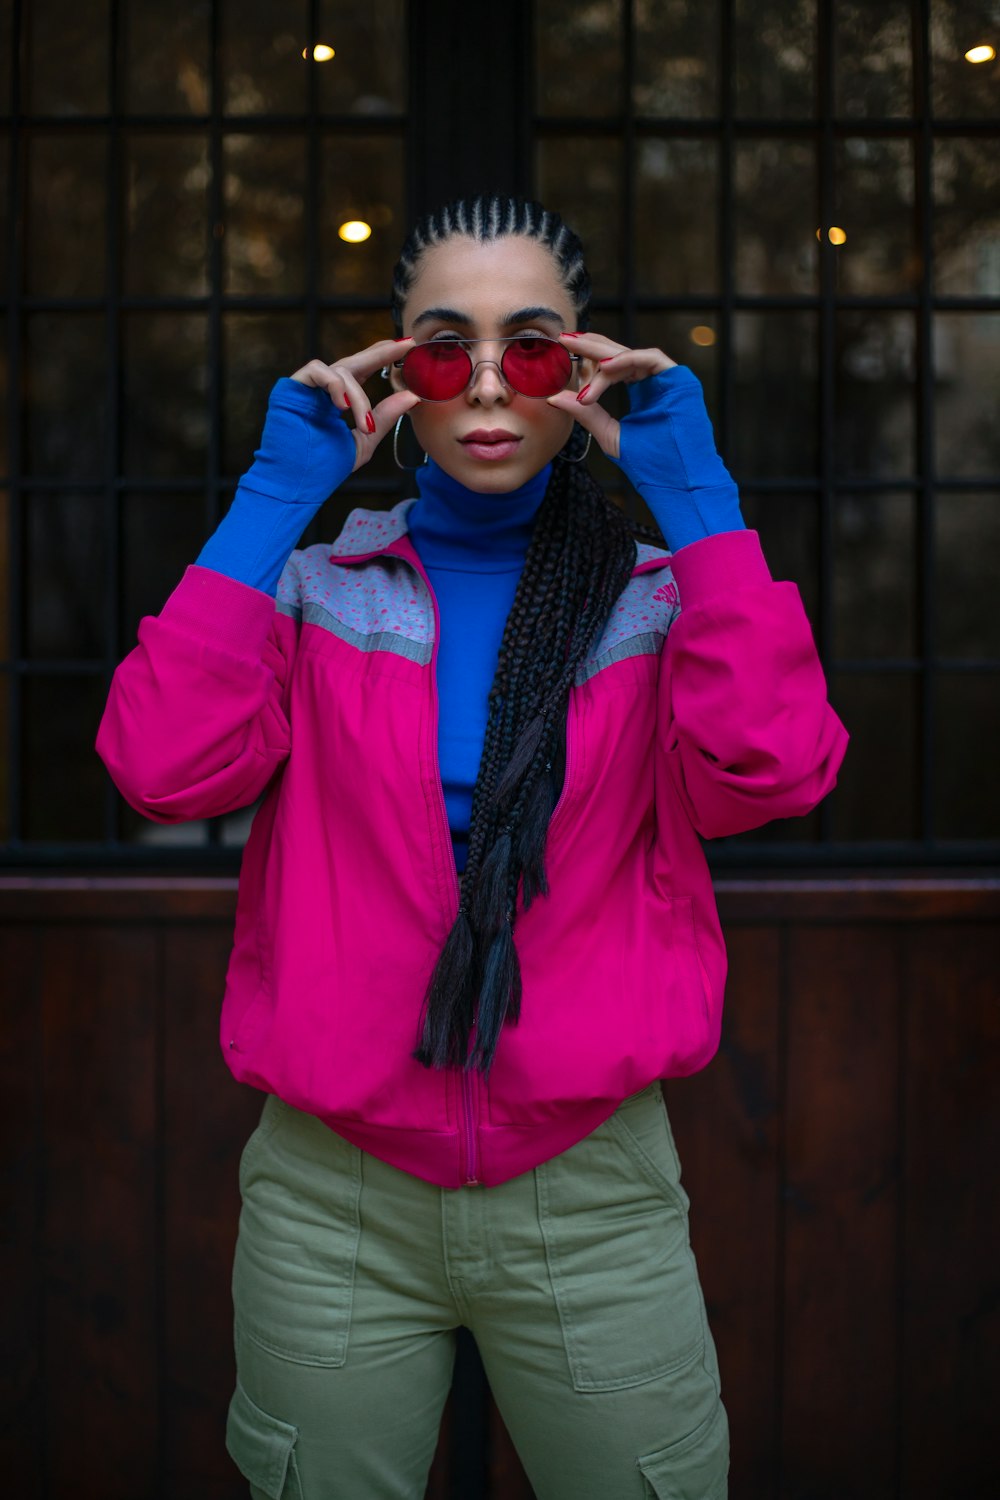 a woman wearing a pink jacket and green pants